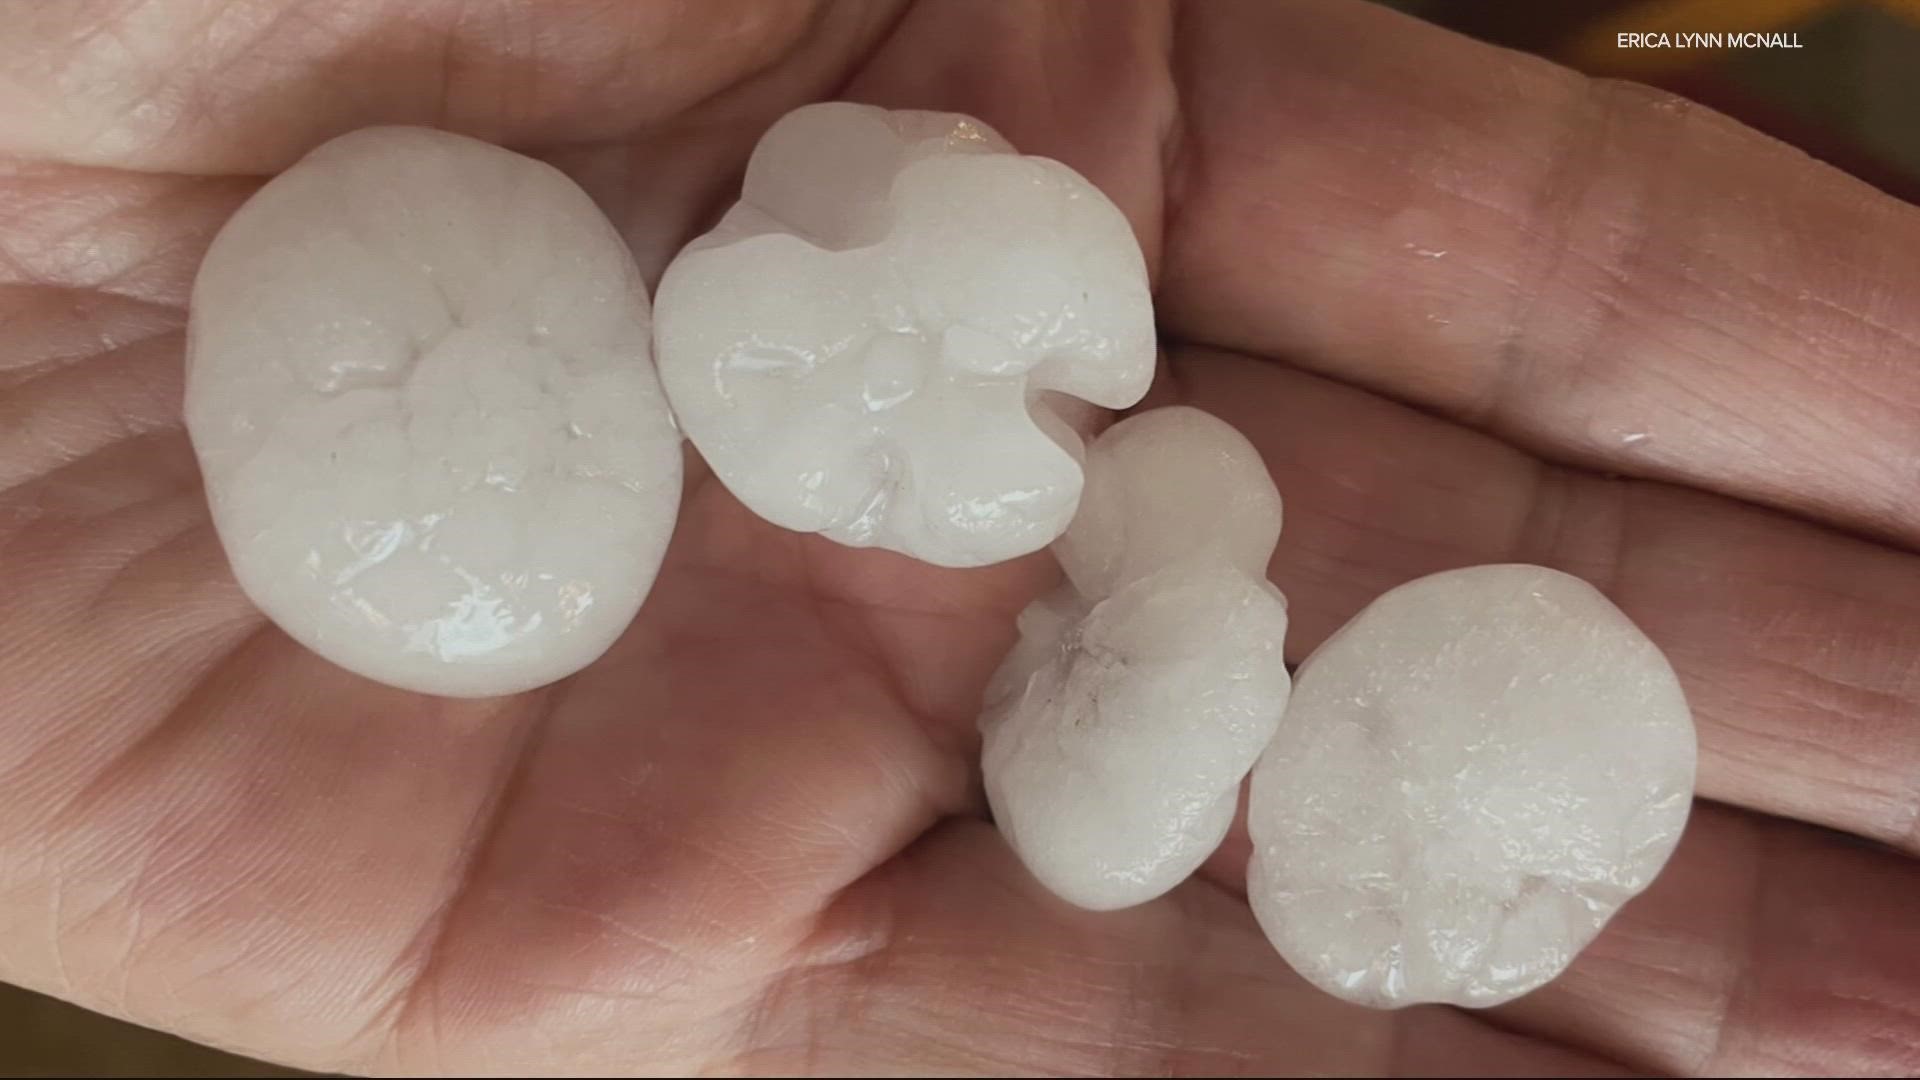 The worst of the storm moved through Wallowa County, dropping hail at least the diameter of a quarter in some areas and causing property damage.